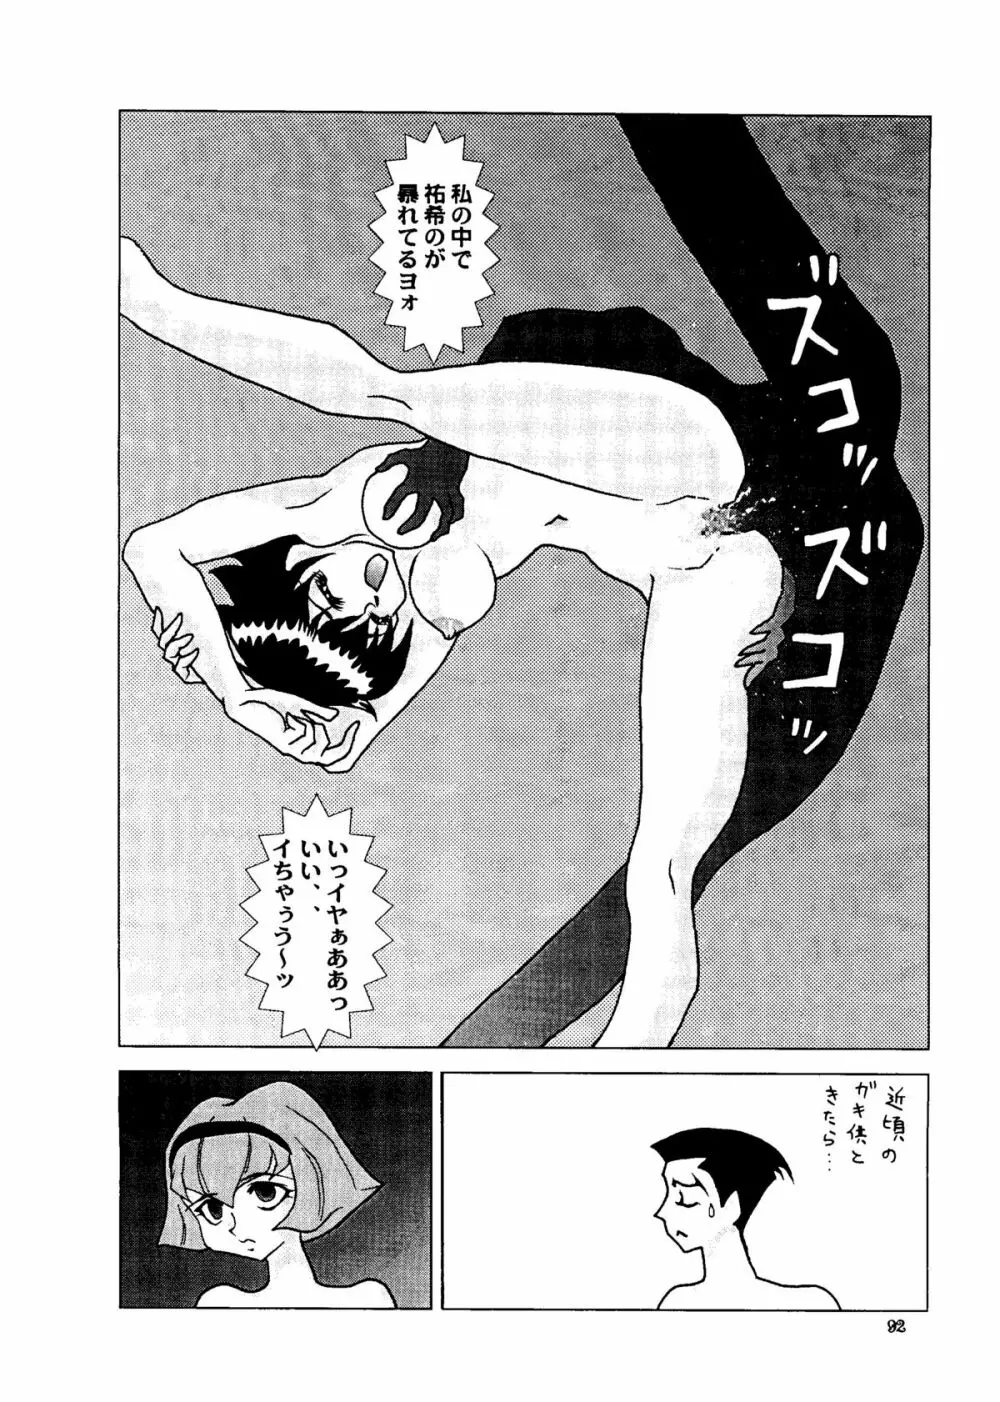 BUY or DIE おかちめんたいこ Page.92